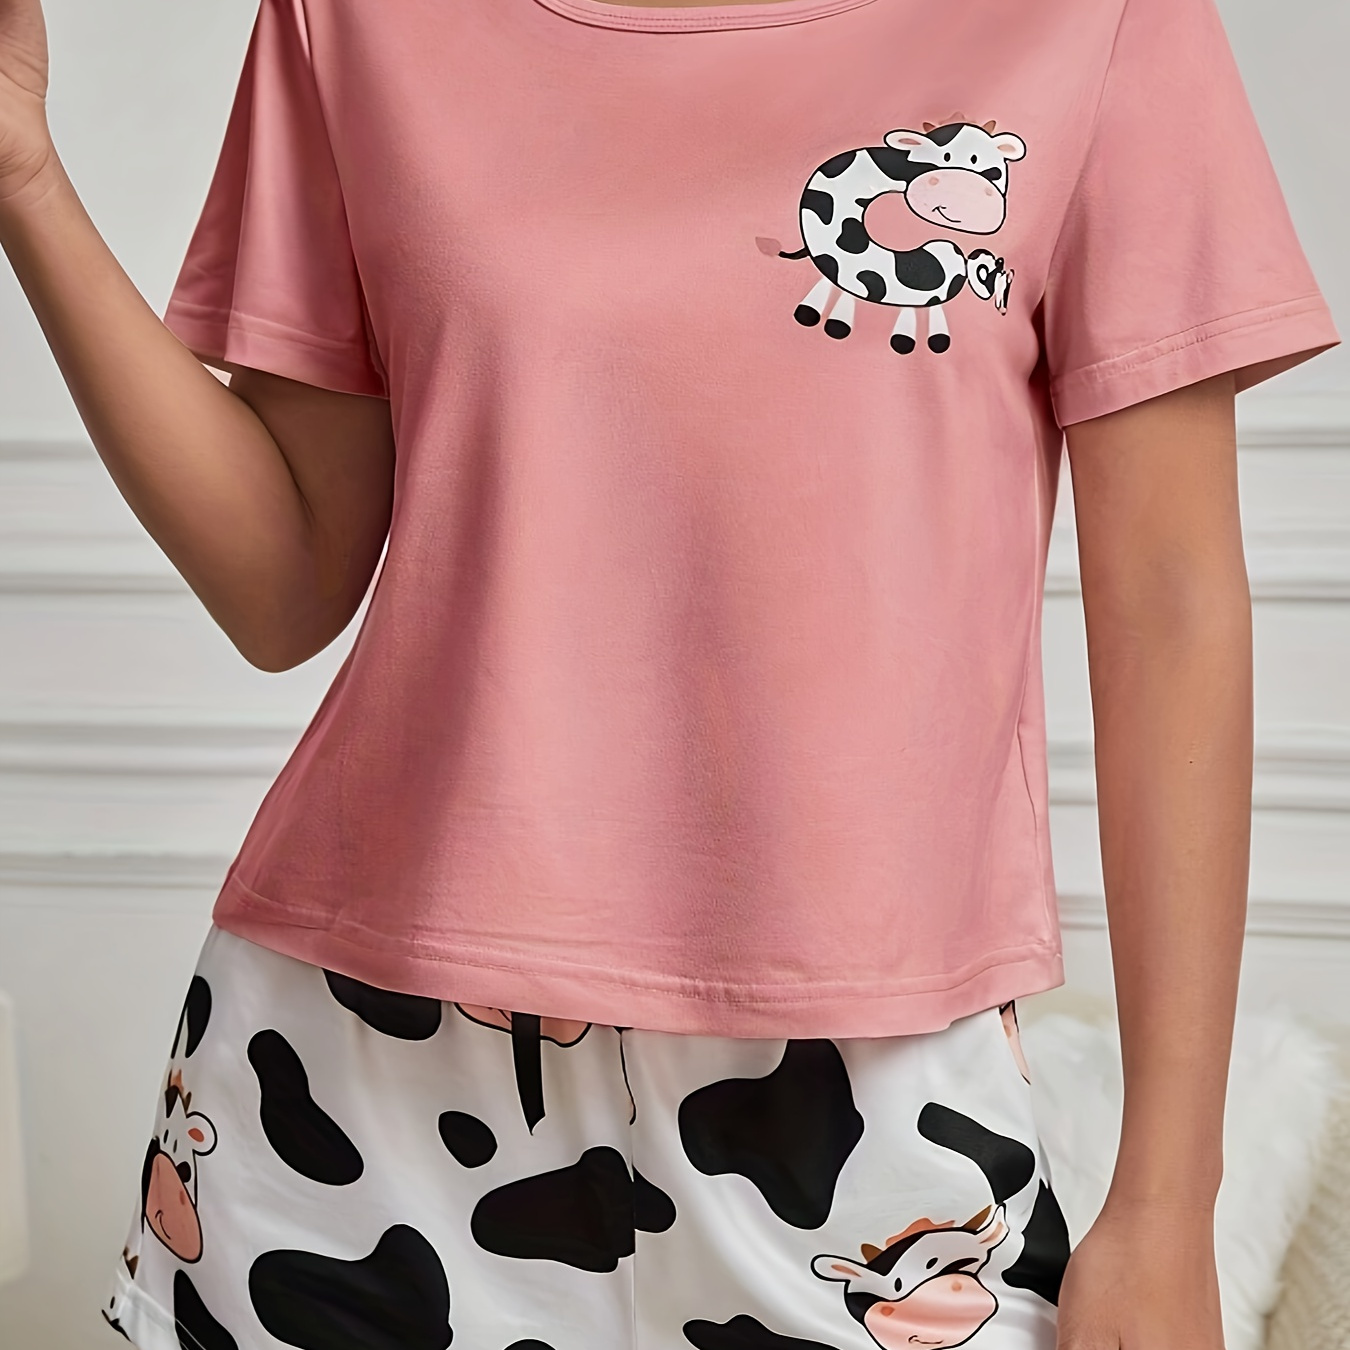 

Women's Cute Cow Print Pajama Set, Short Sleeve Round Neck Top & Shorts, Comfortable Relaxed Fit, Summer Nightwear